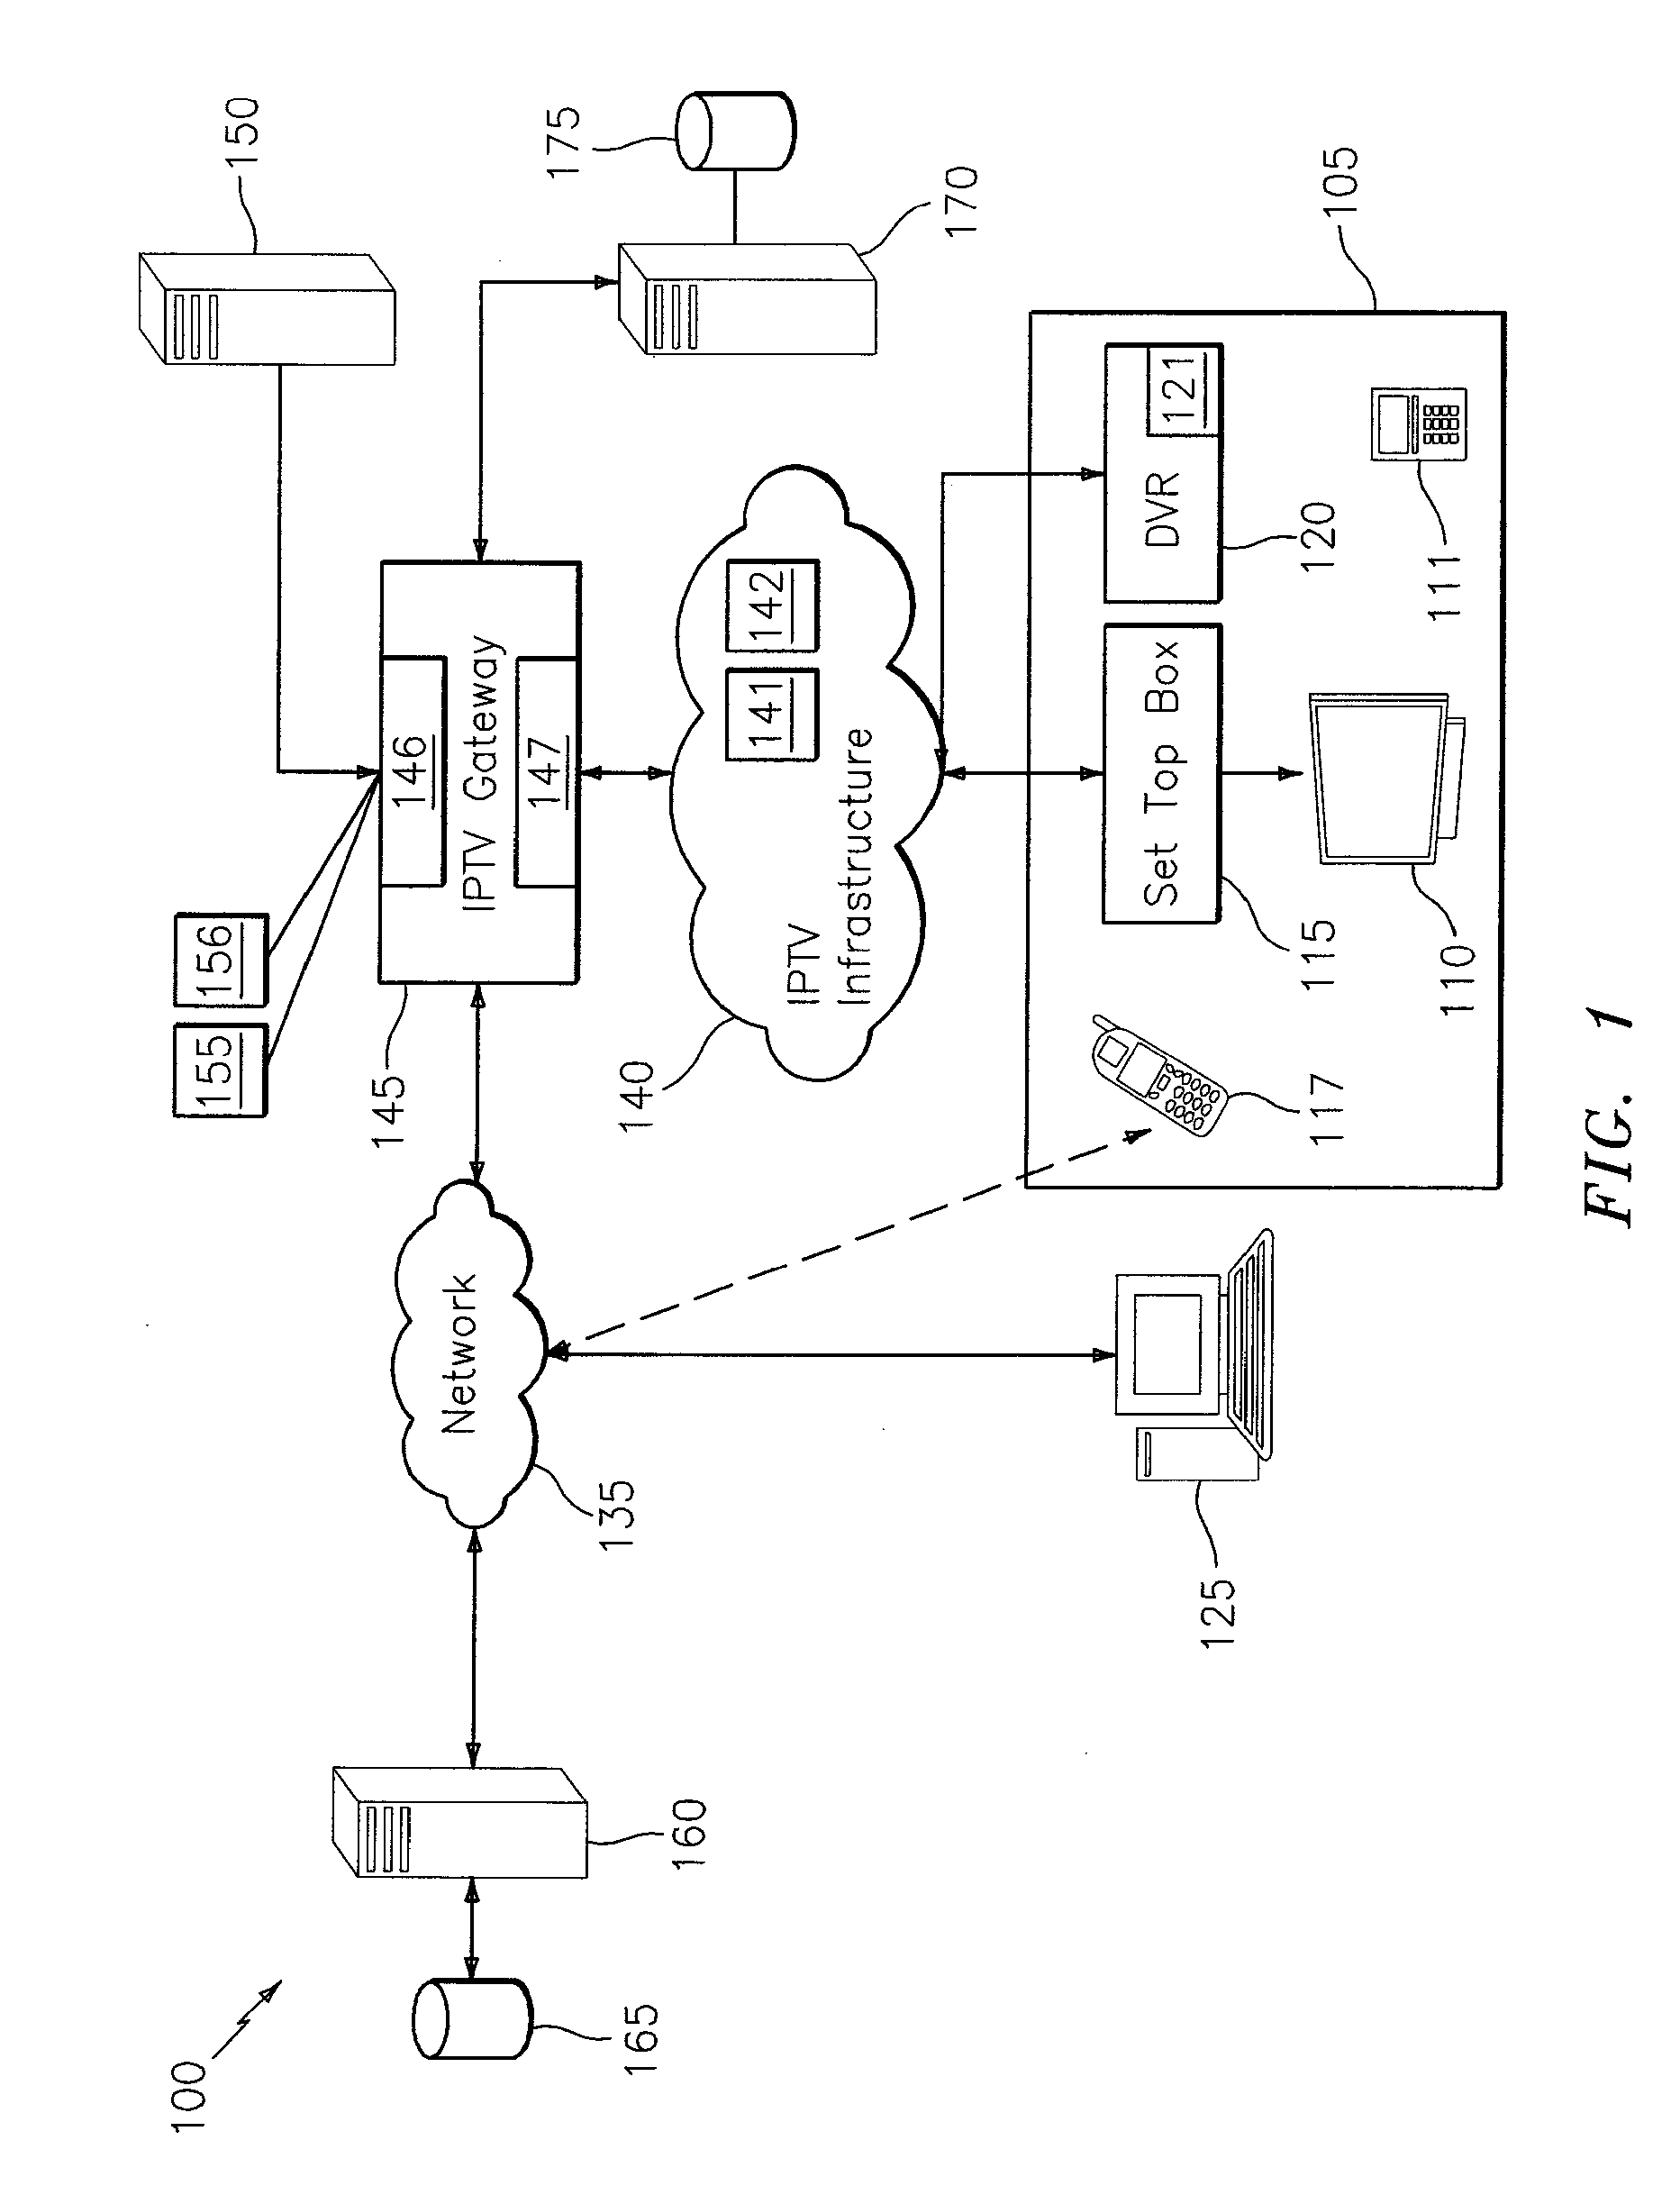 Systems, methods, and computer products for digital video recorder management and scheduling